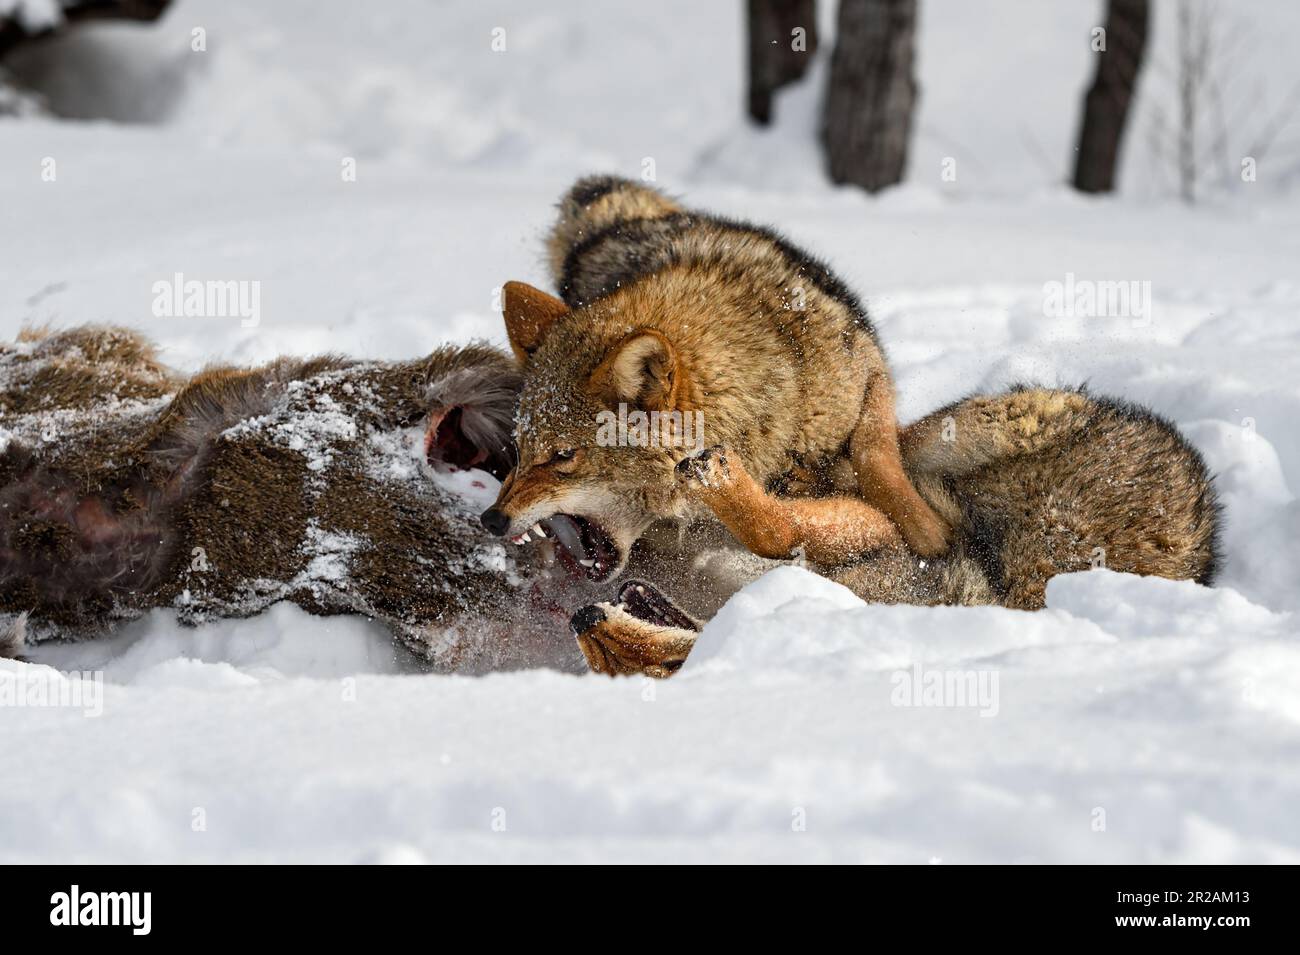 Coyote (Canis latrans) Pins and Snarls at Packmate at White-Tail Deer Carcass Winter - captive animals Stock Photo